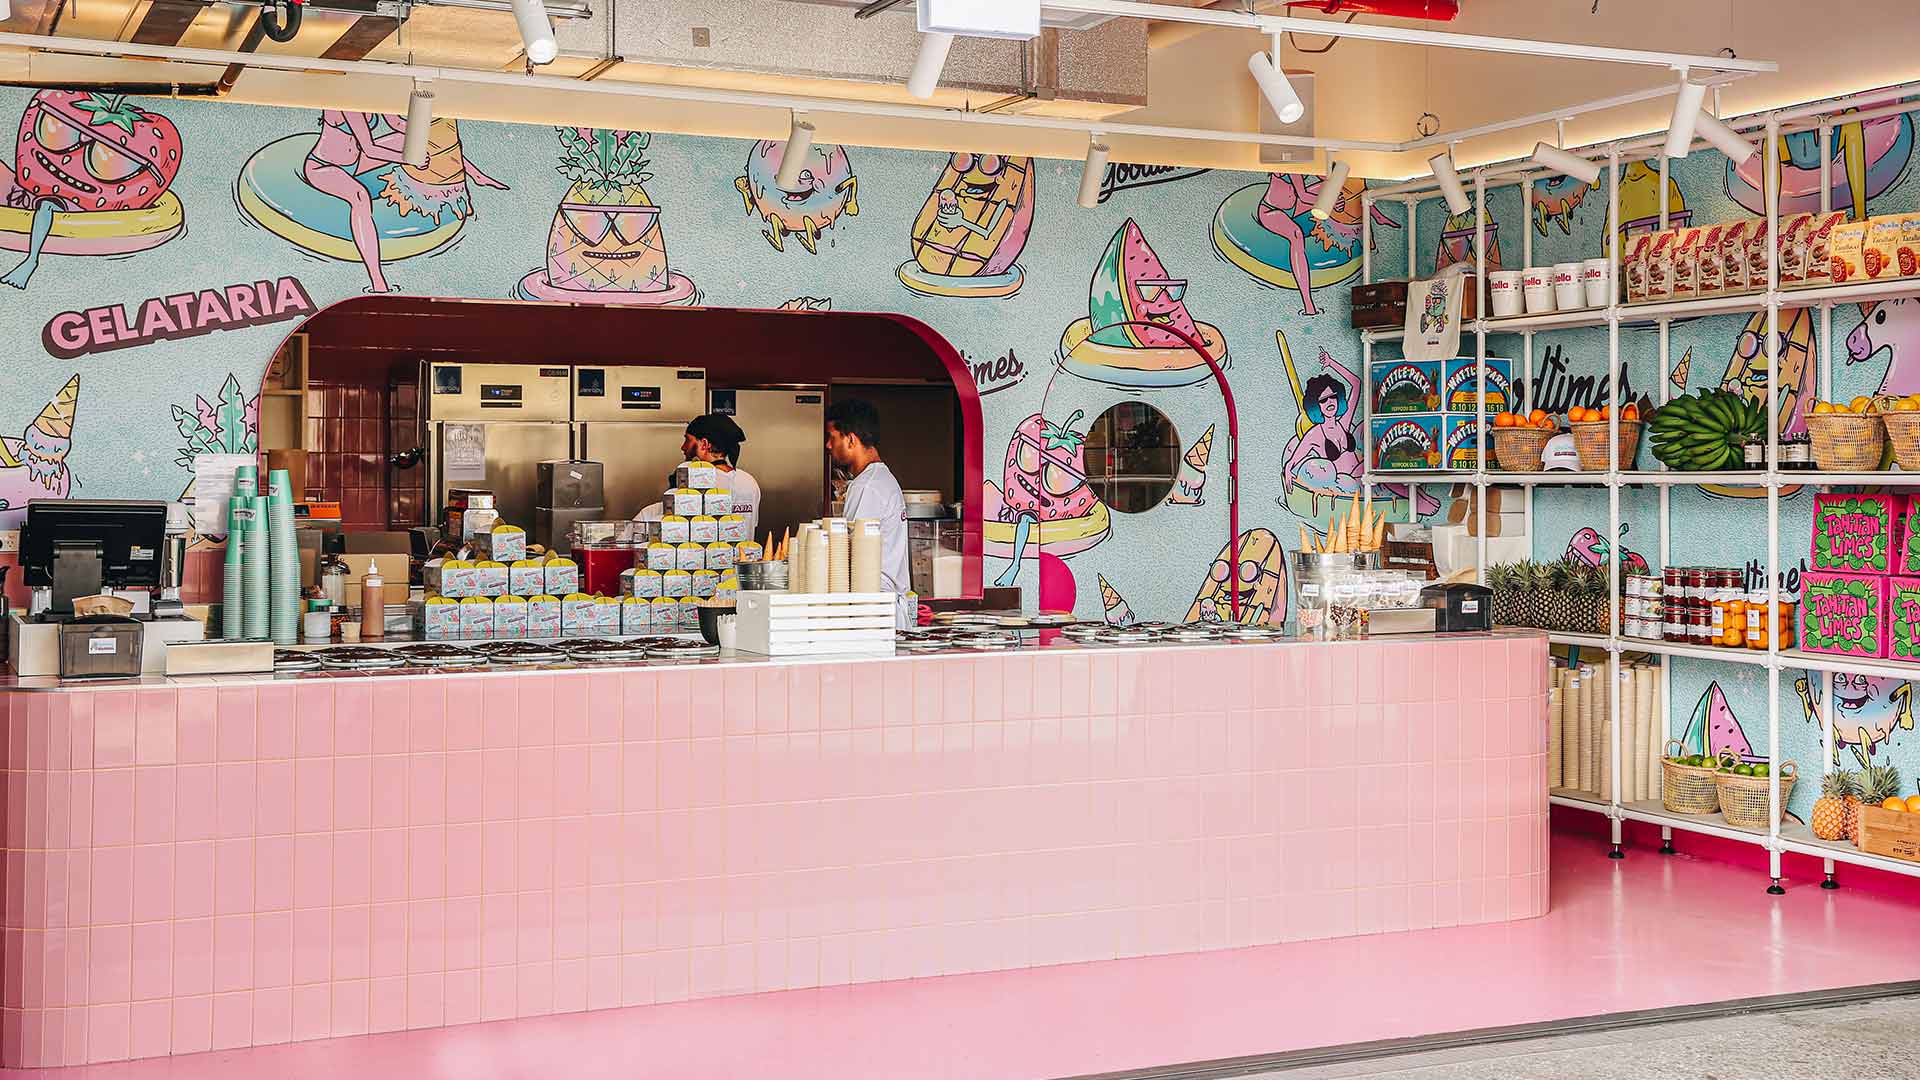 GOODTIMES GELATERIA - home to some of the best gelato in Brisbane - and some of the best ice cream in Brisbane.